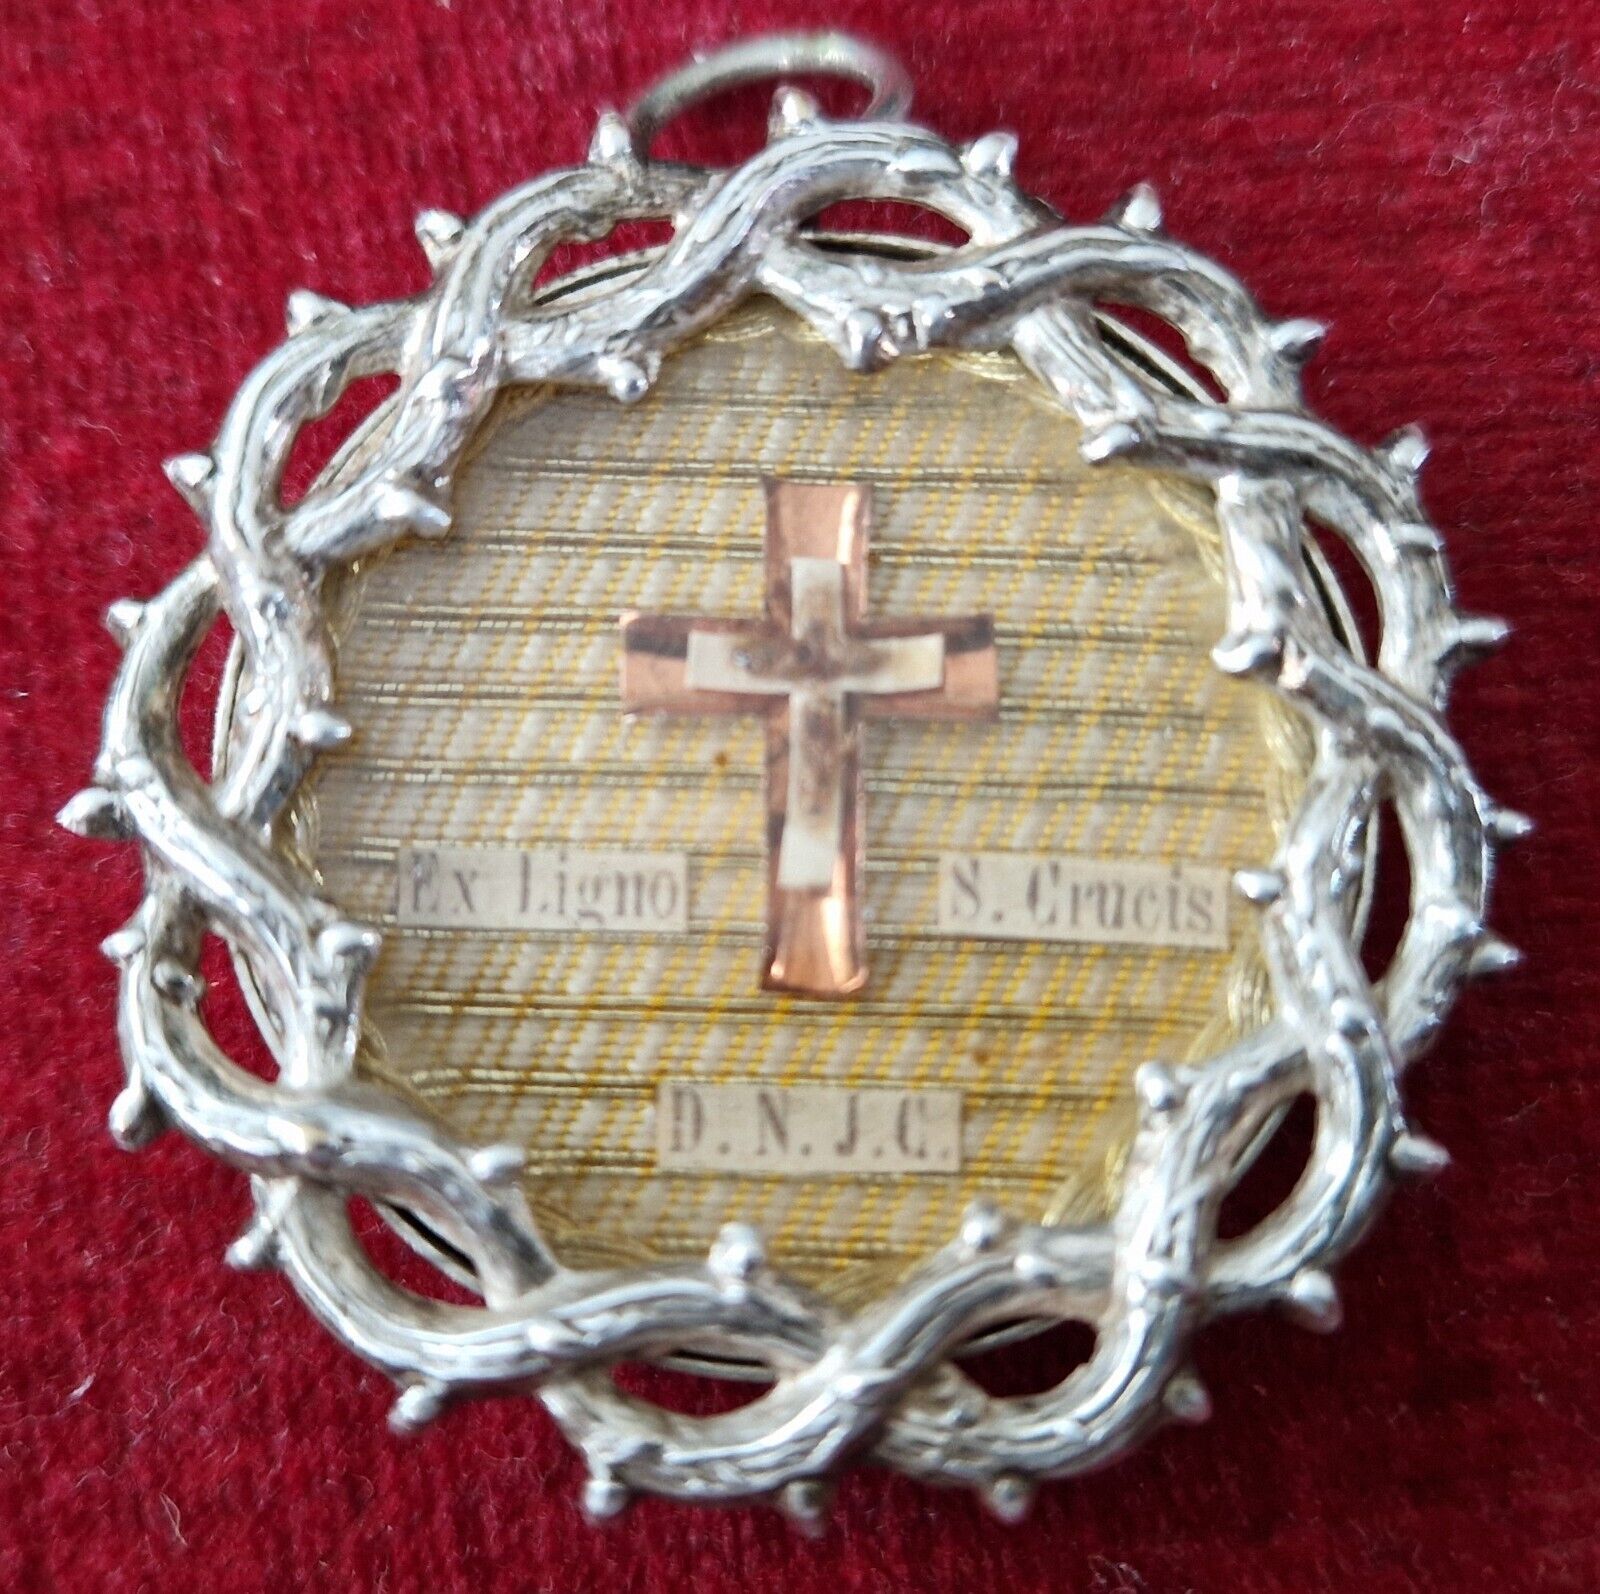 176) Sterling silver reliquary The True Cross of Our Lord  Ex Ligno S Crucis DNJ